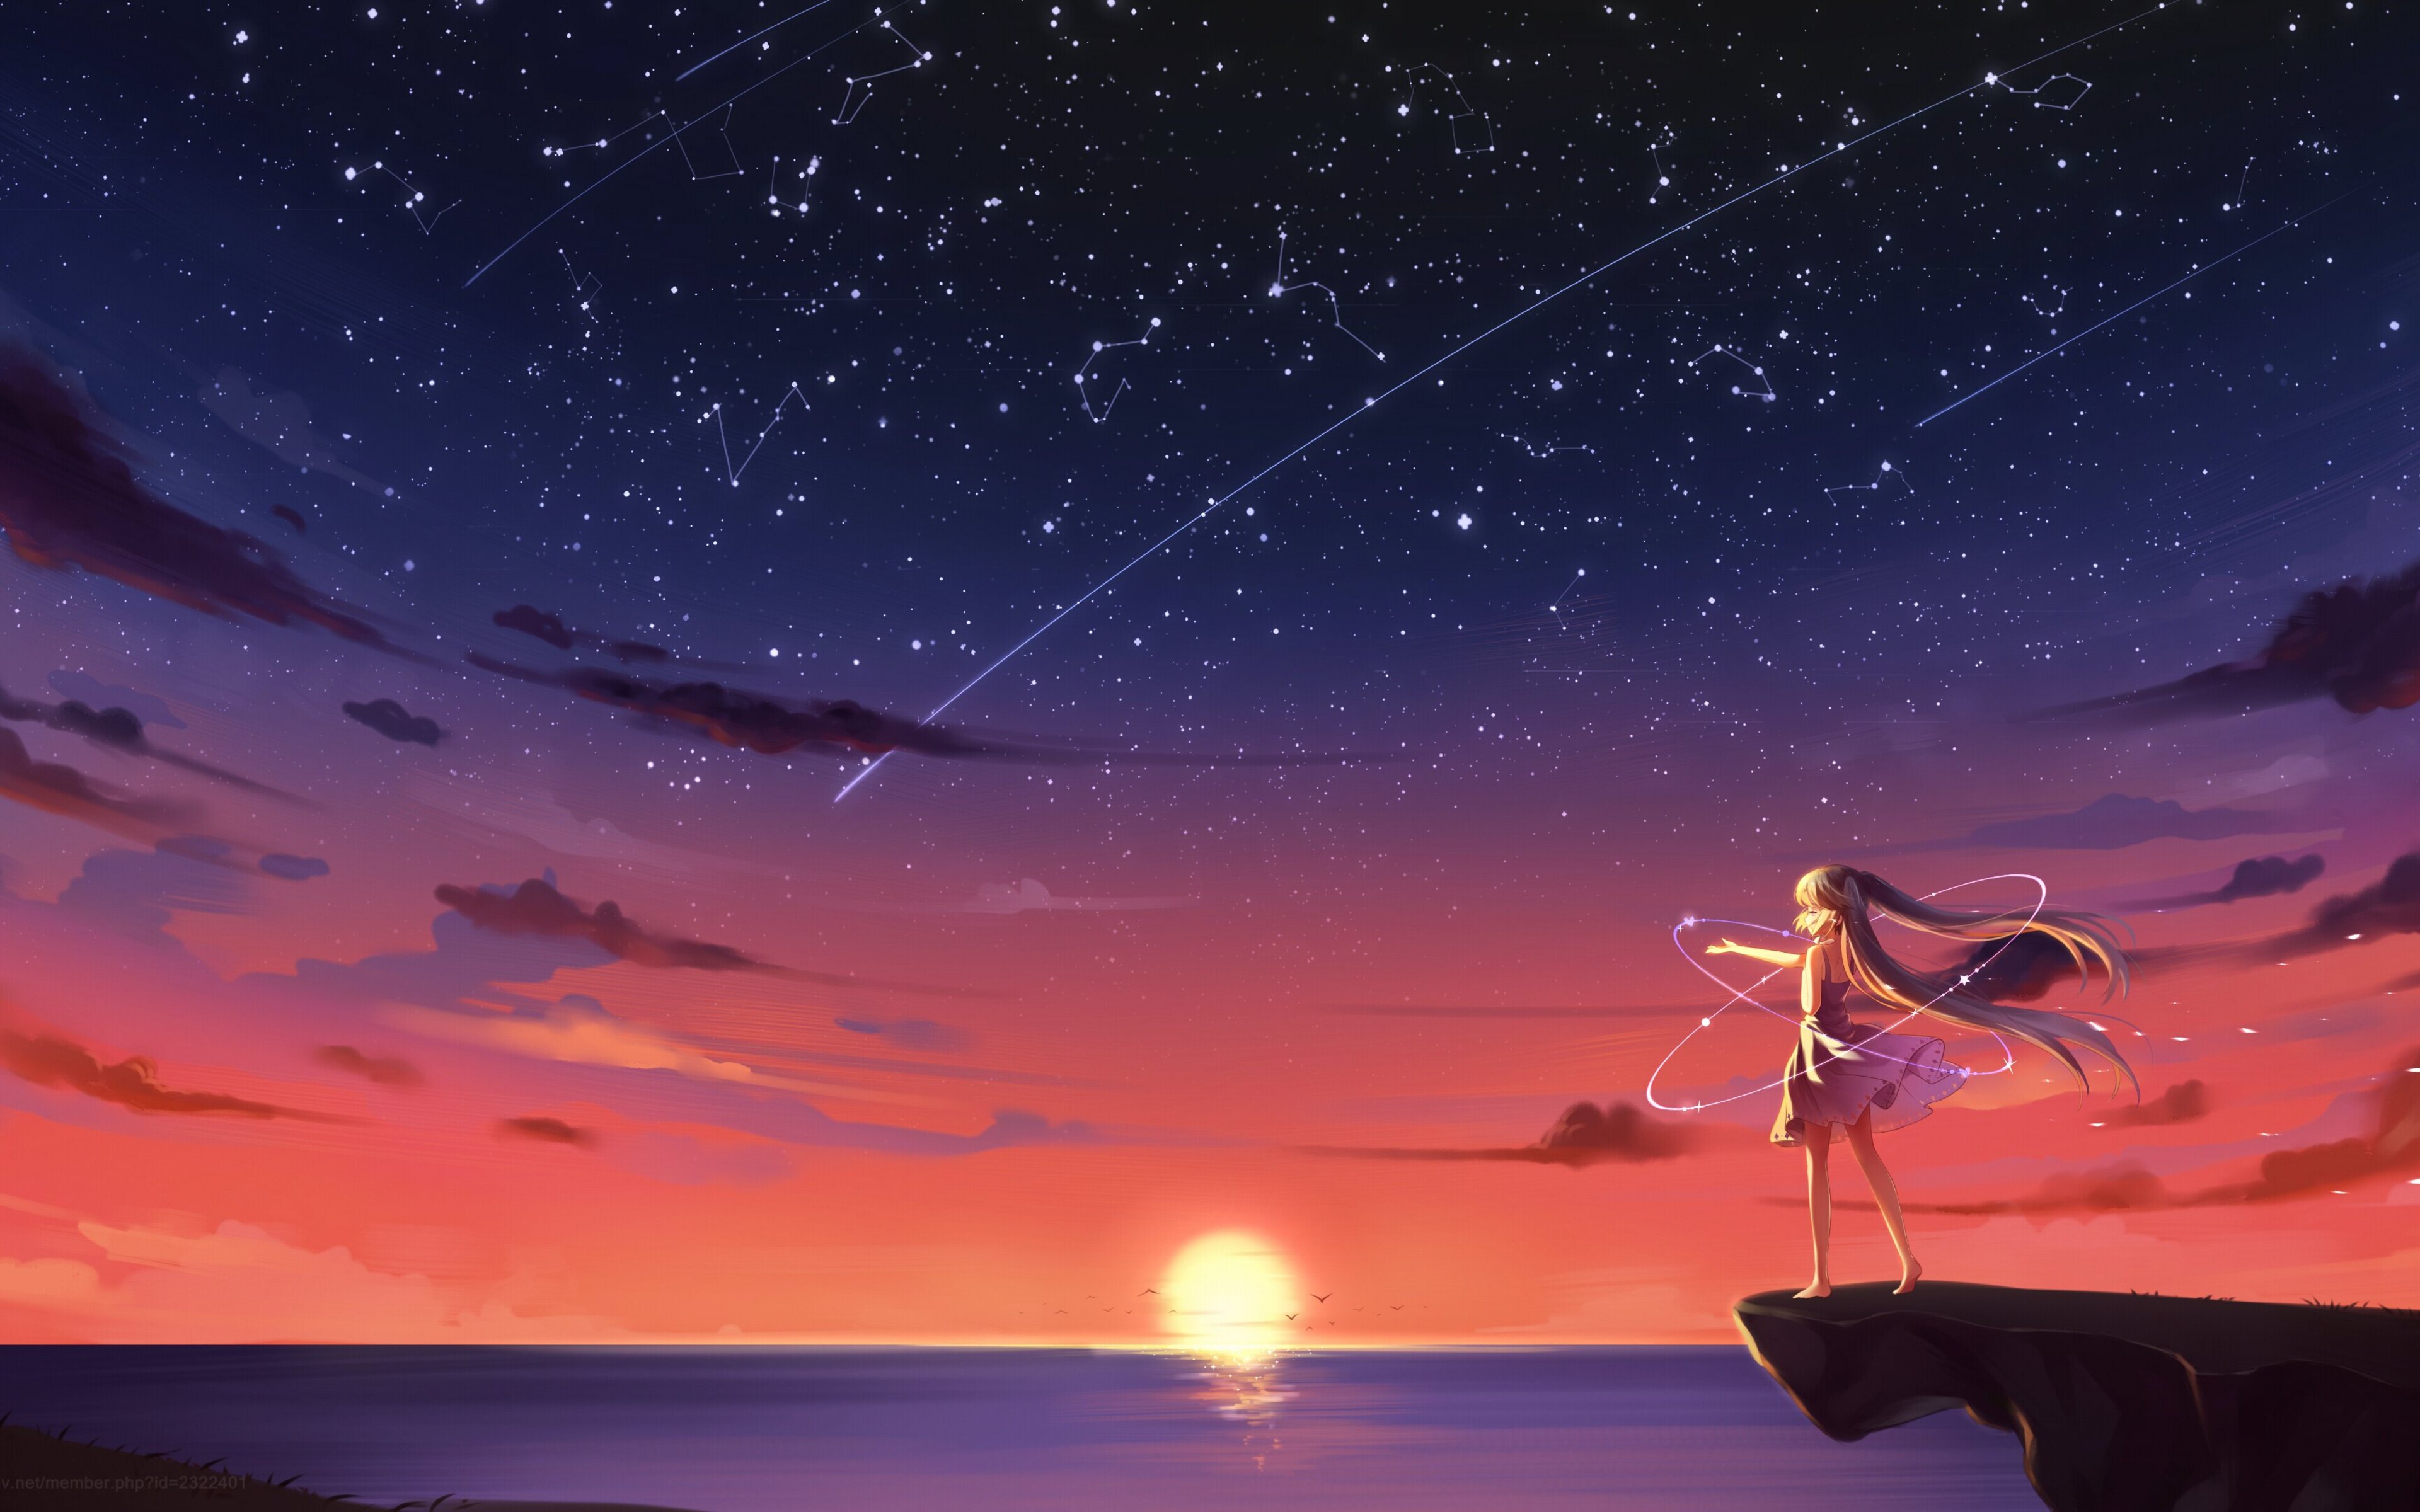 Anime girl standing on a cliff looking at the stars - Sunset, laptop, anime sunset